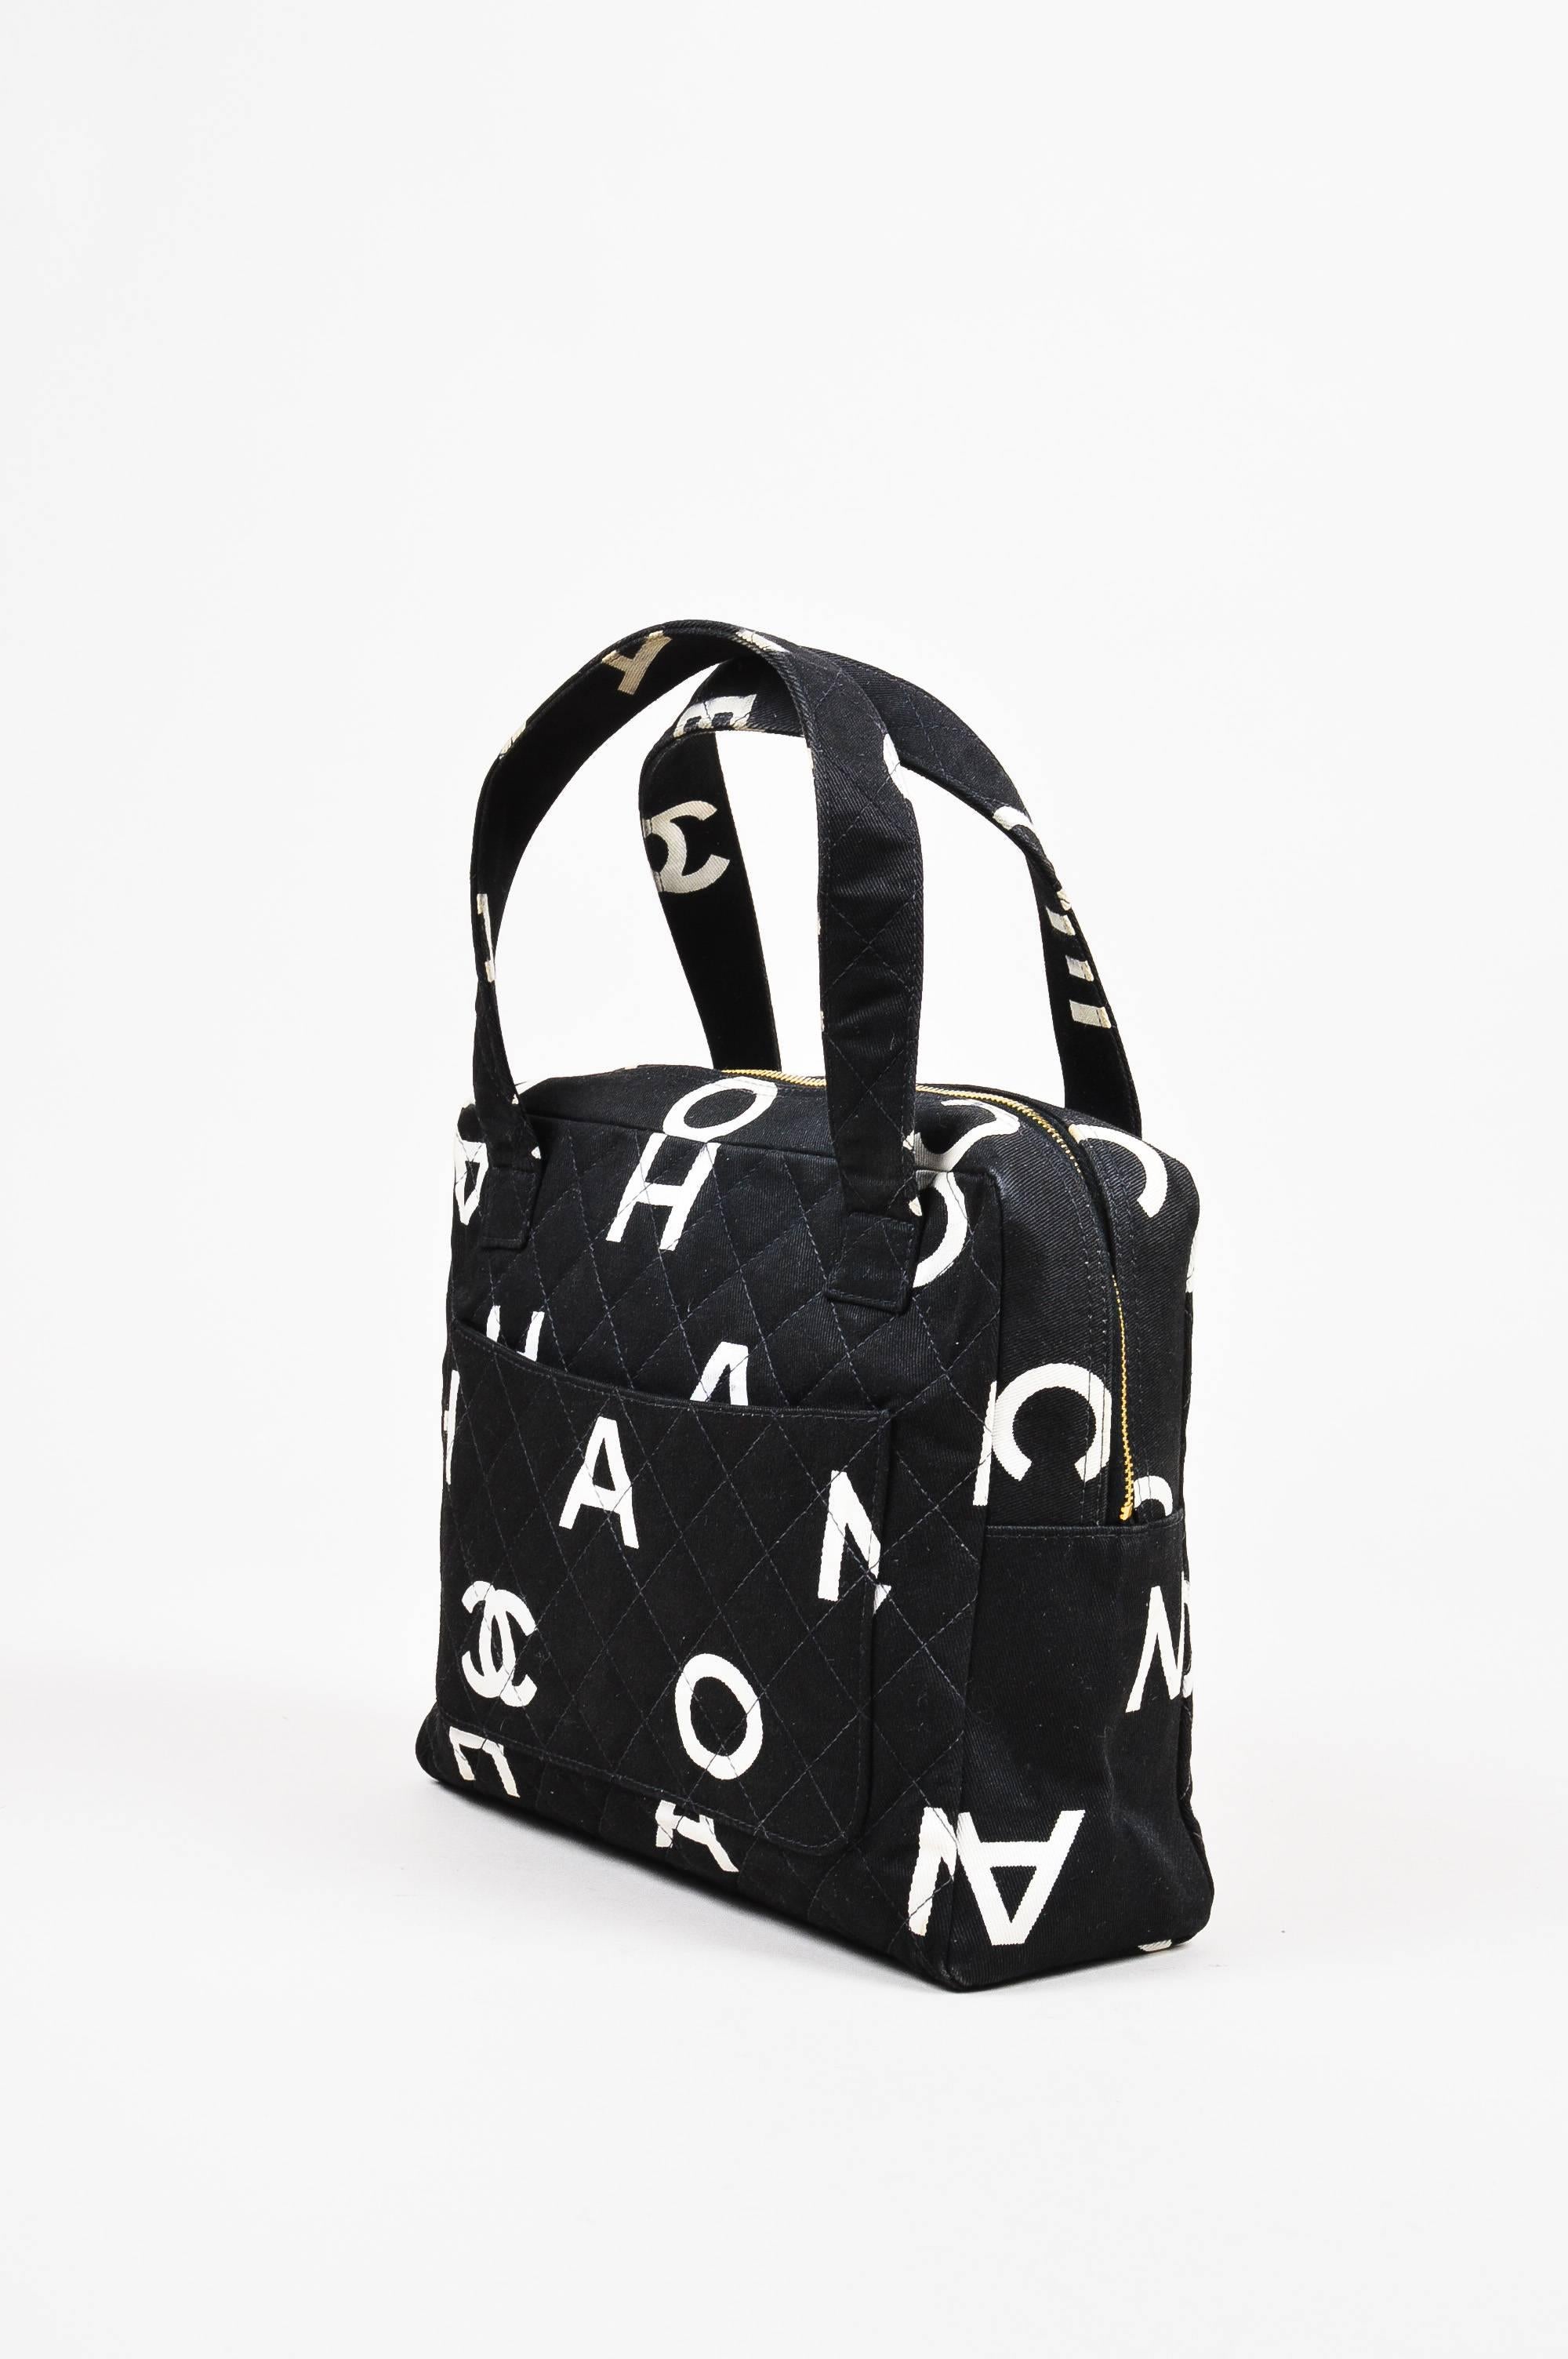 This vintage bag would pair well with a red blazer and black skinny leg pants. Black and white quilted canvas bag from Chanel circa 1996-1997. Printed 'CC' monograms and printed letters throughout spell "Chanel." An open pocket on the